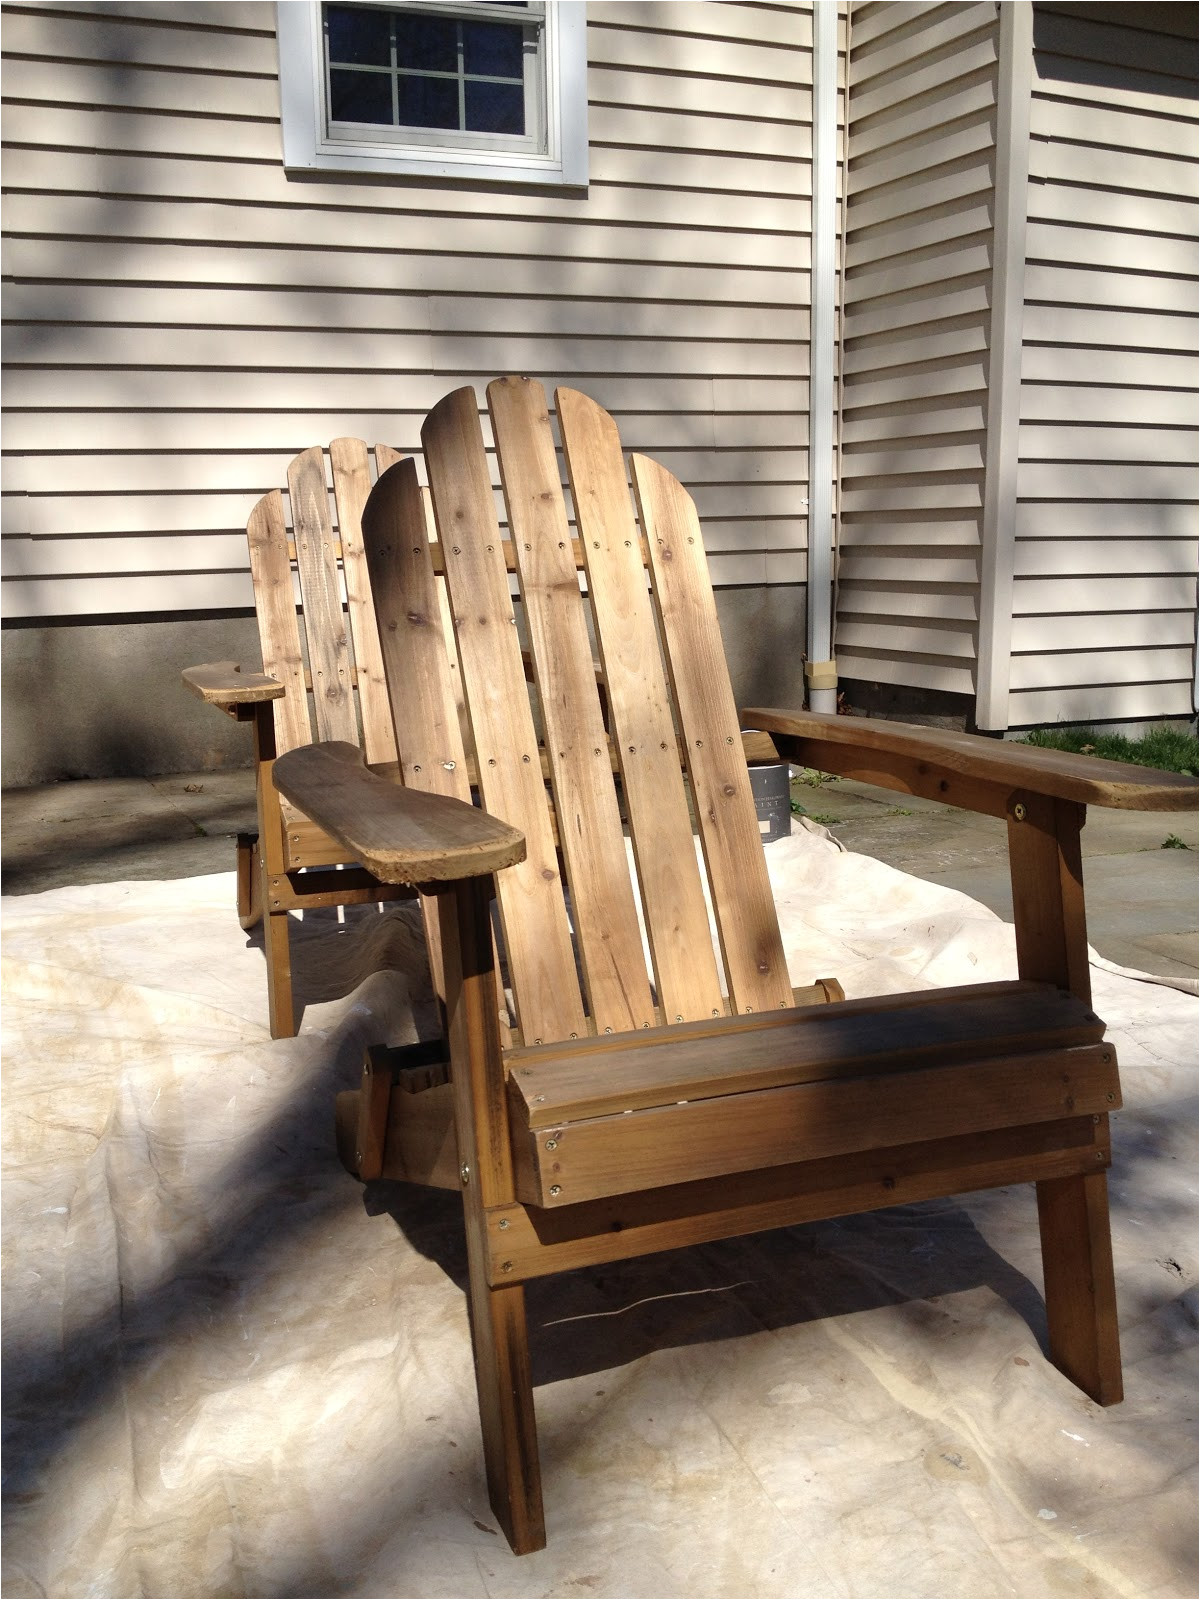 Adirondack Chair Plans Home Depot Furniture Breathtaking Lowes Adirondack Chair for